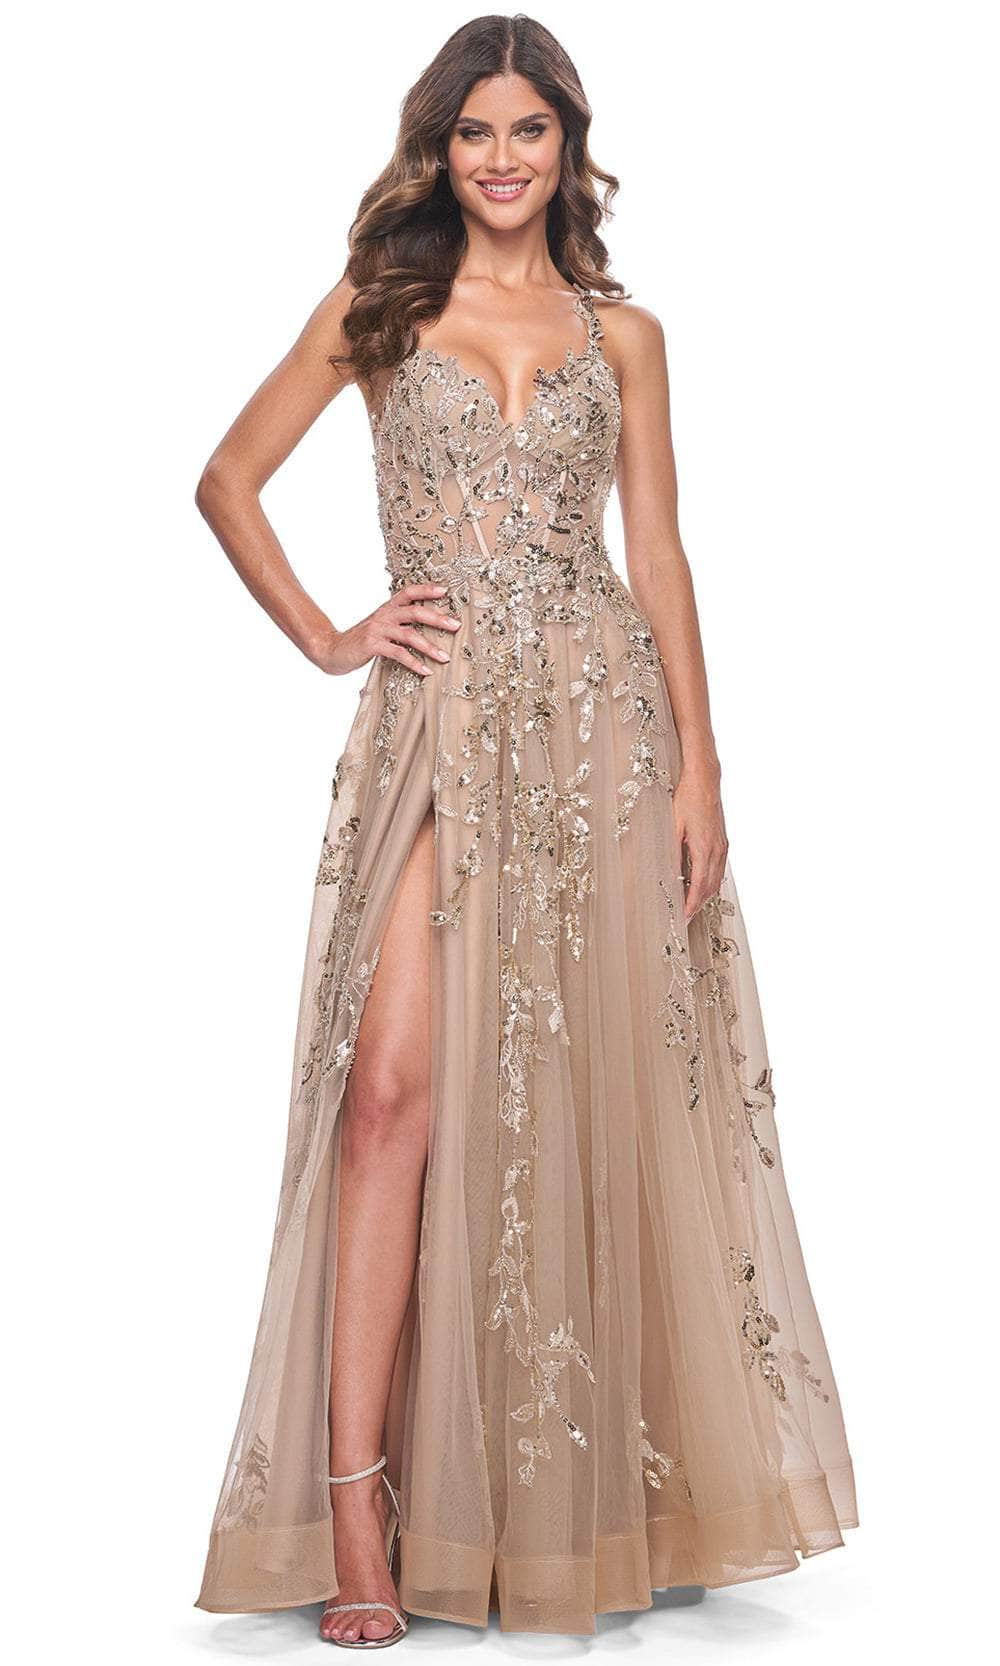 Image of La Femme 32052 - Sleeveless Sequin Lace Prom Gown